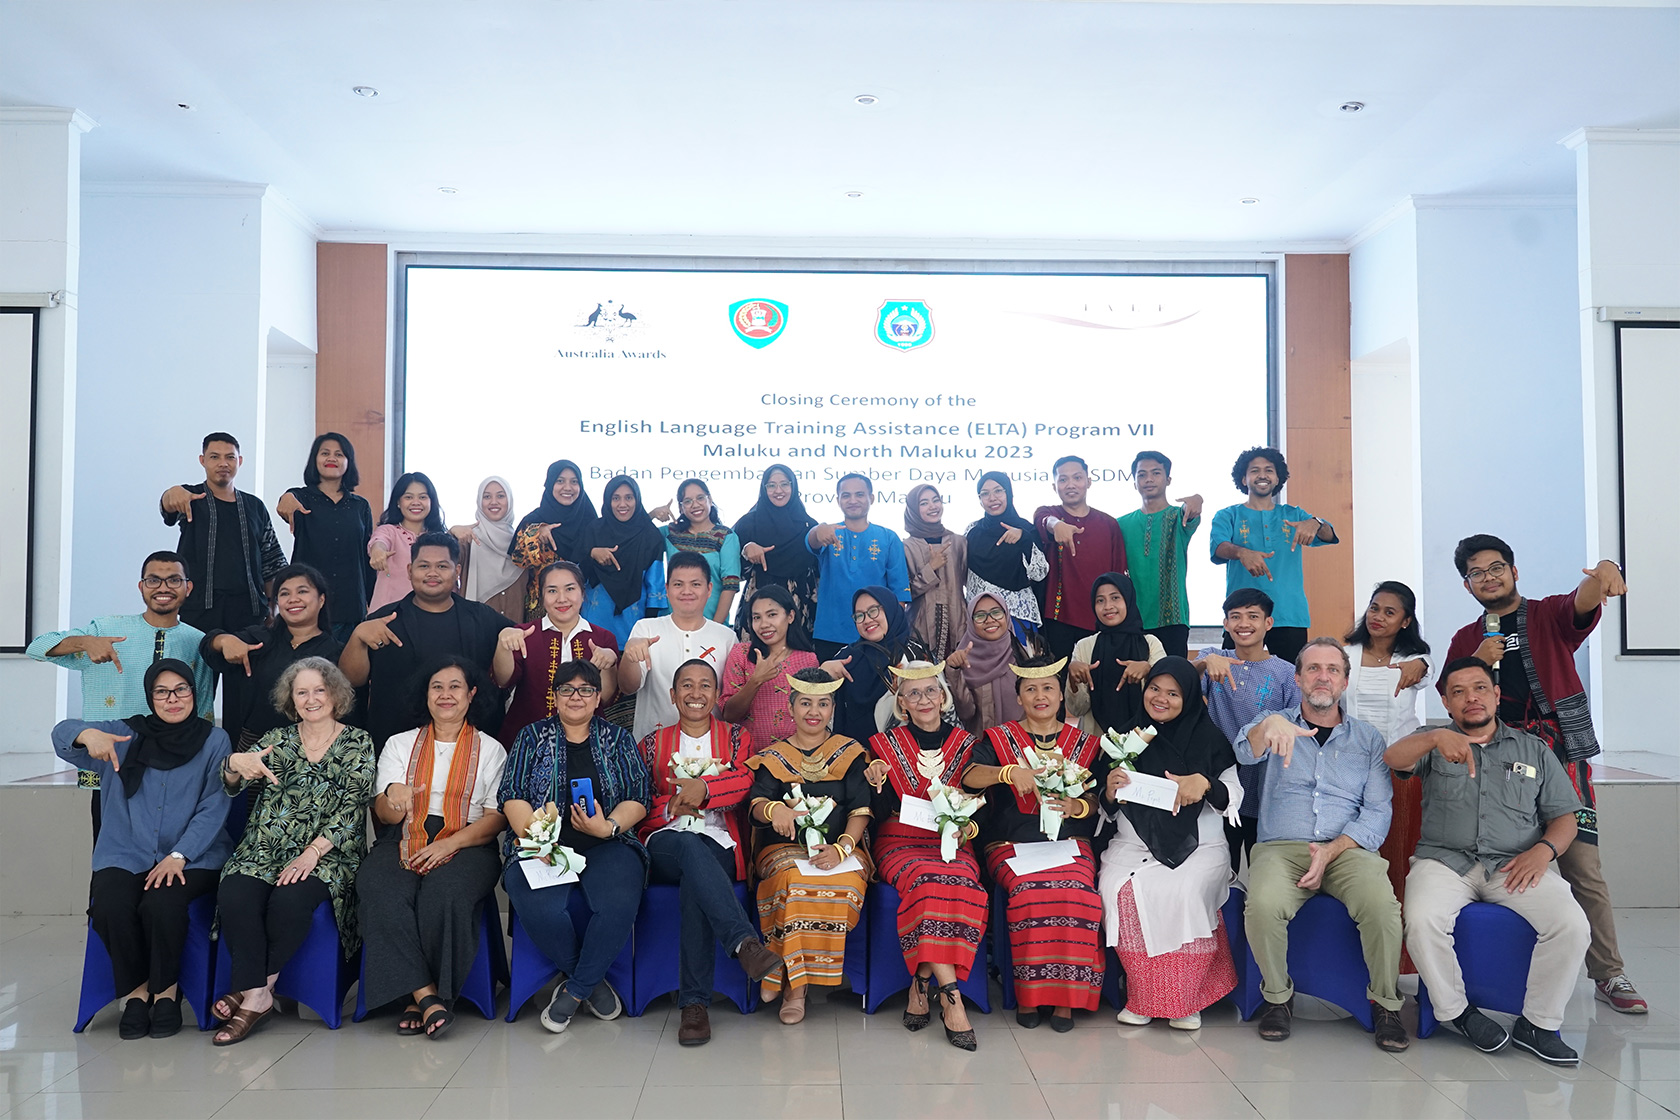 Participants Maluku and North Maluku gather for the closing ceremony of ELTA in Ambon, capturing the moment with a group photo.